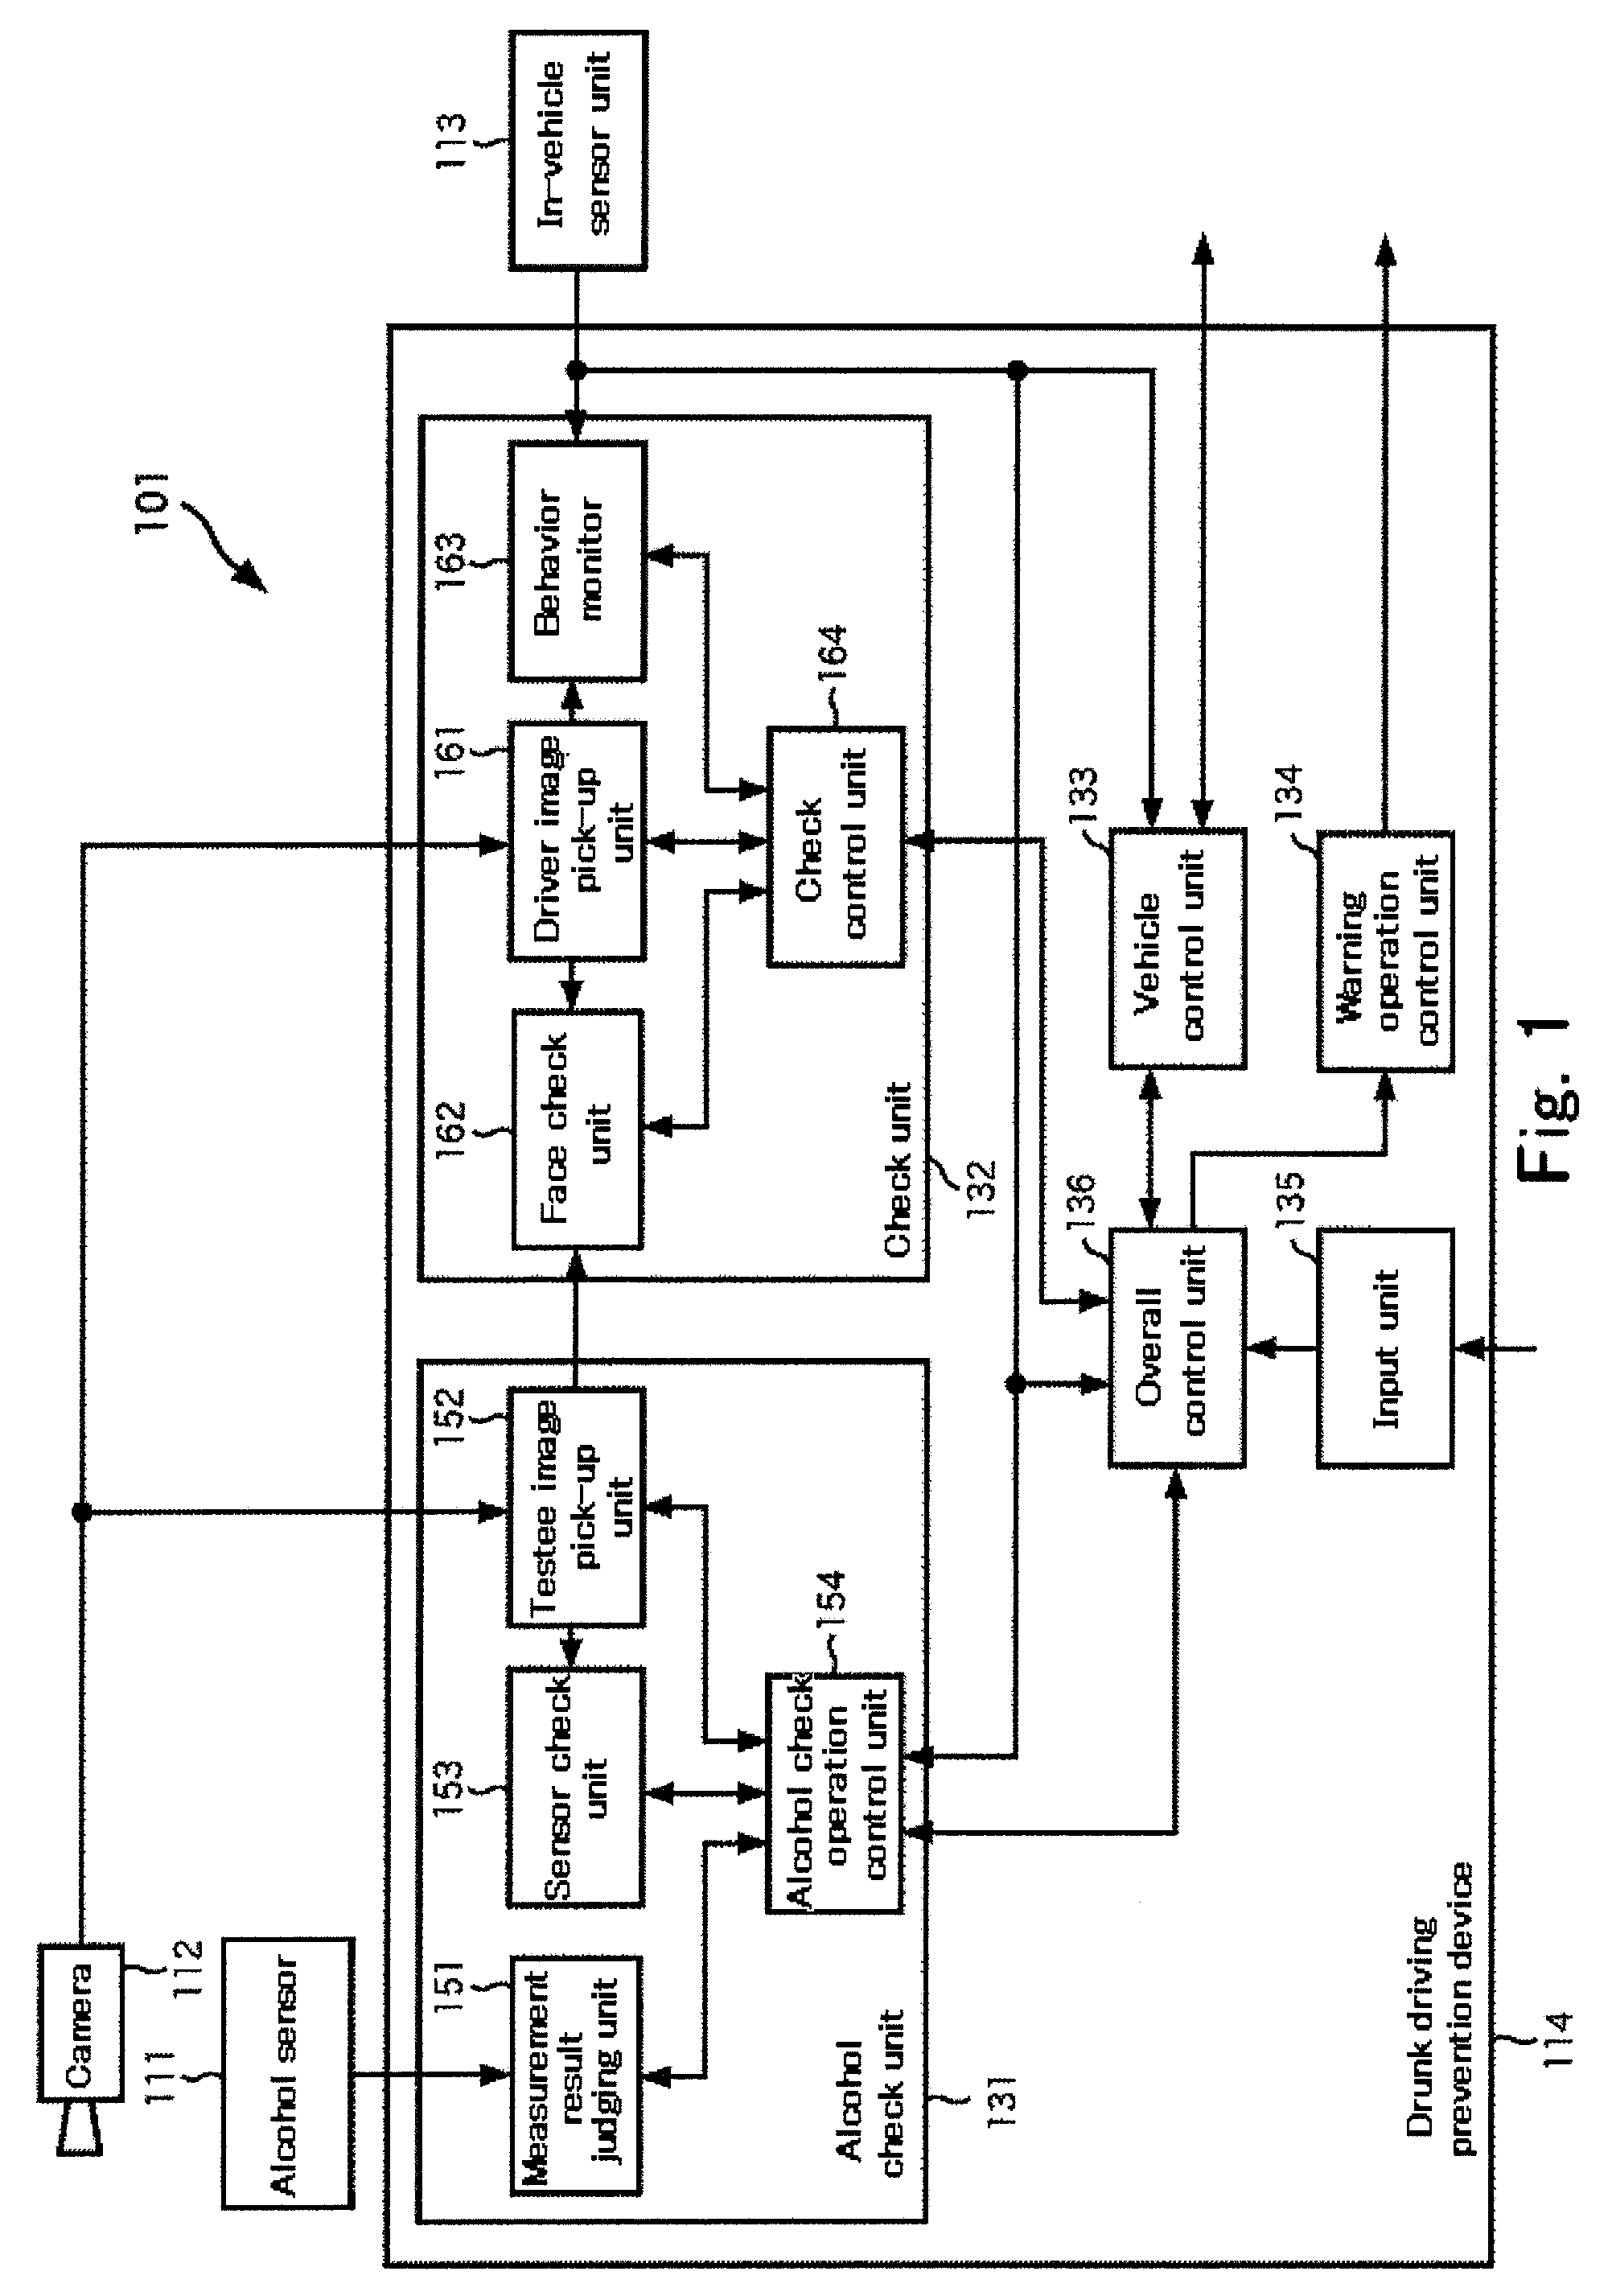 Detecting device, method, program and system